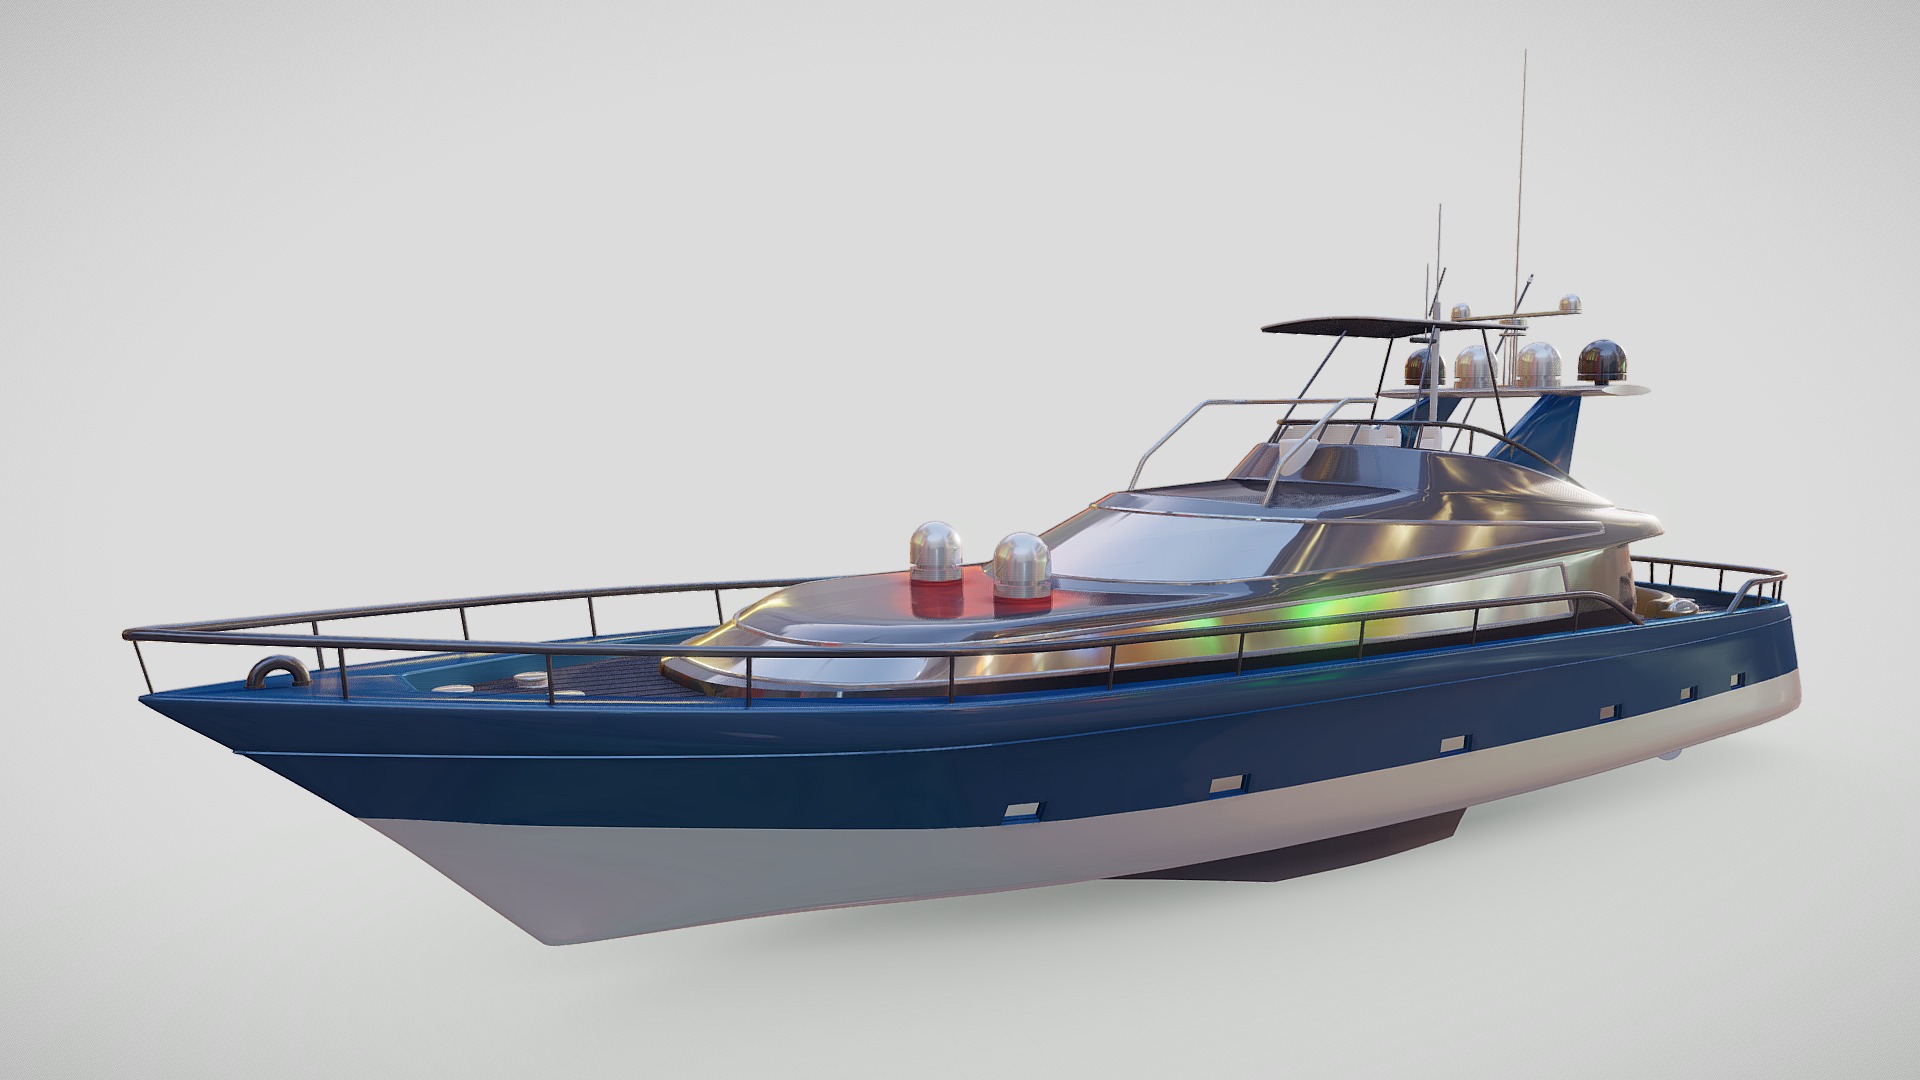 3D model 3D Boat 08 - This is a 3D model of the 3D Boat 08. The 3D model is about a boat on the water.